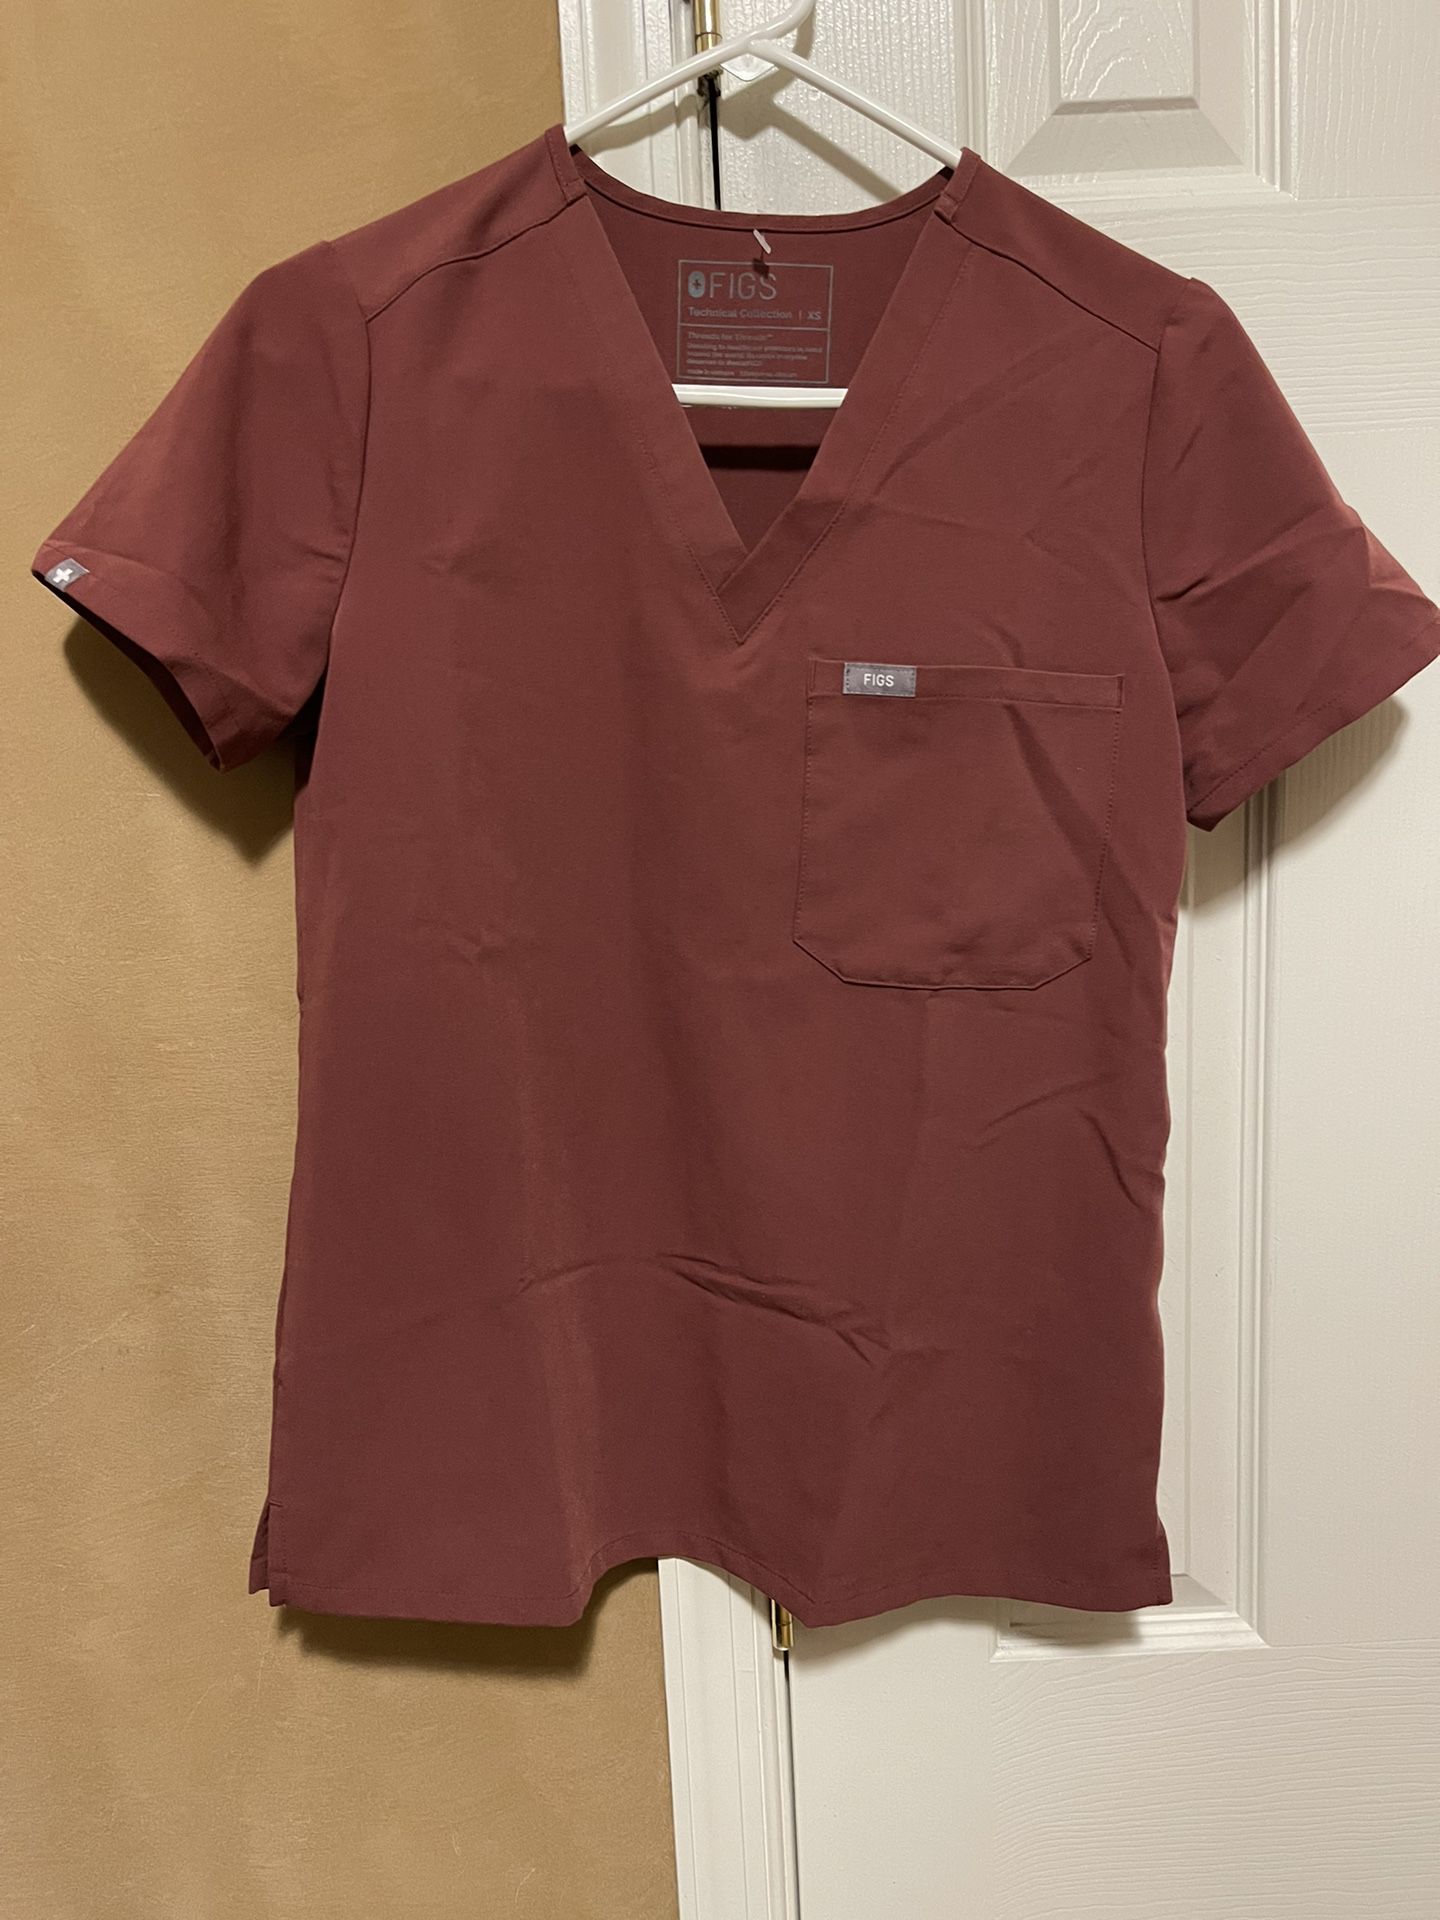 FIGS Technical Collection Maroon V Scrubs Top-XS